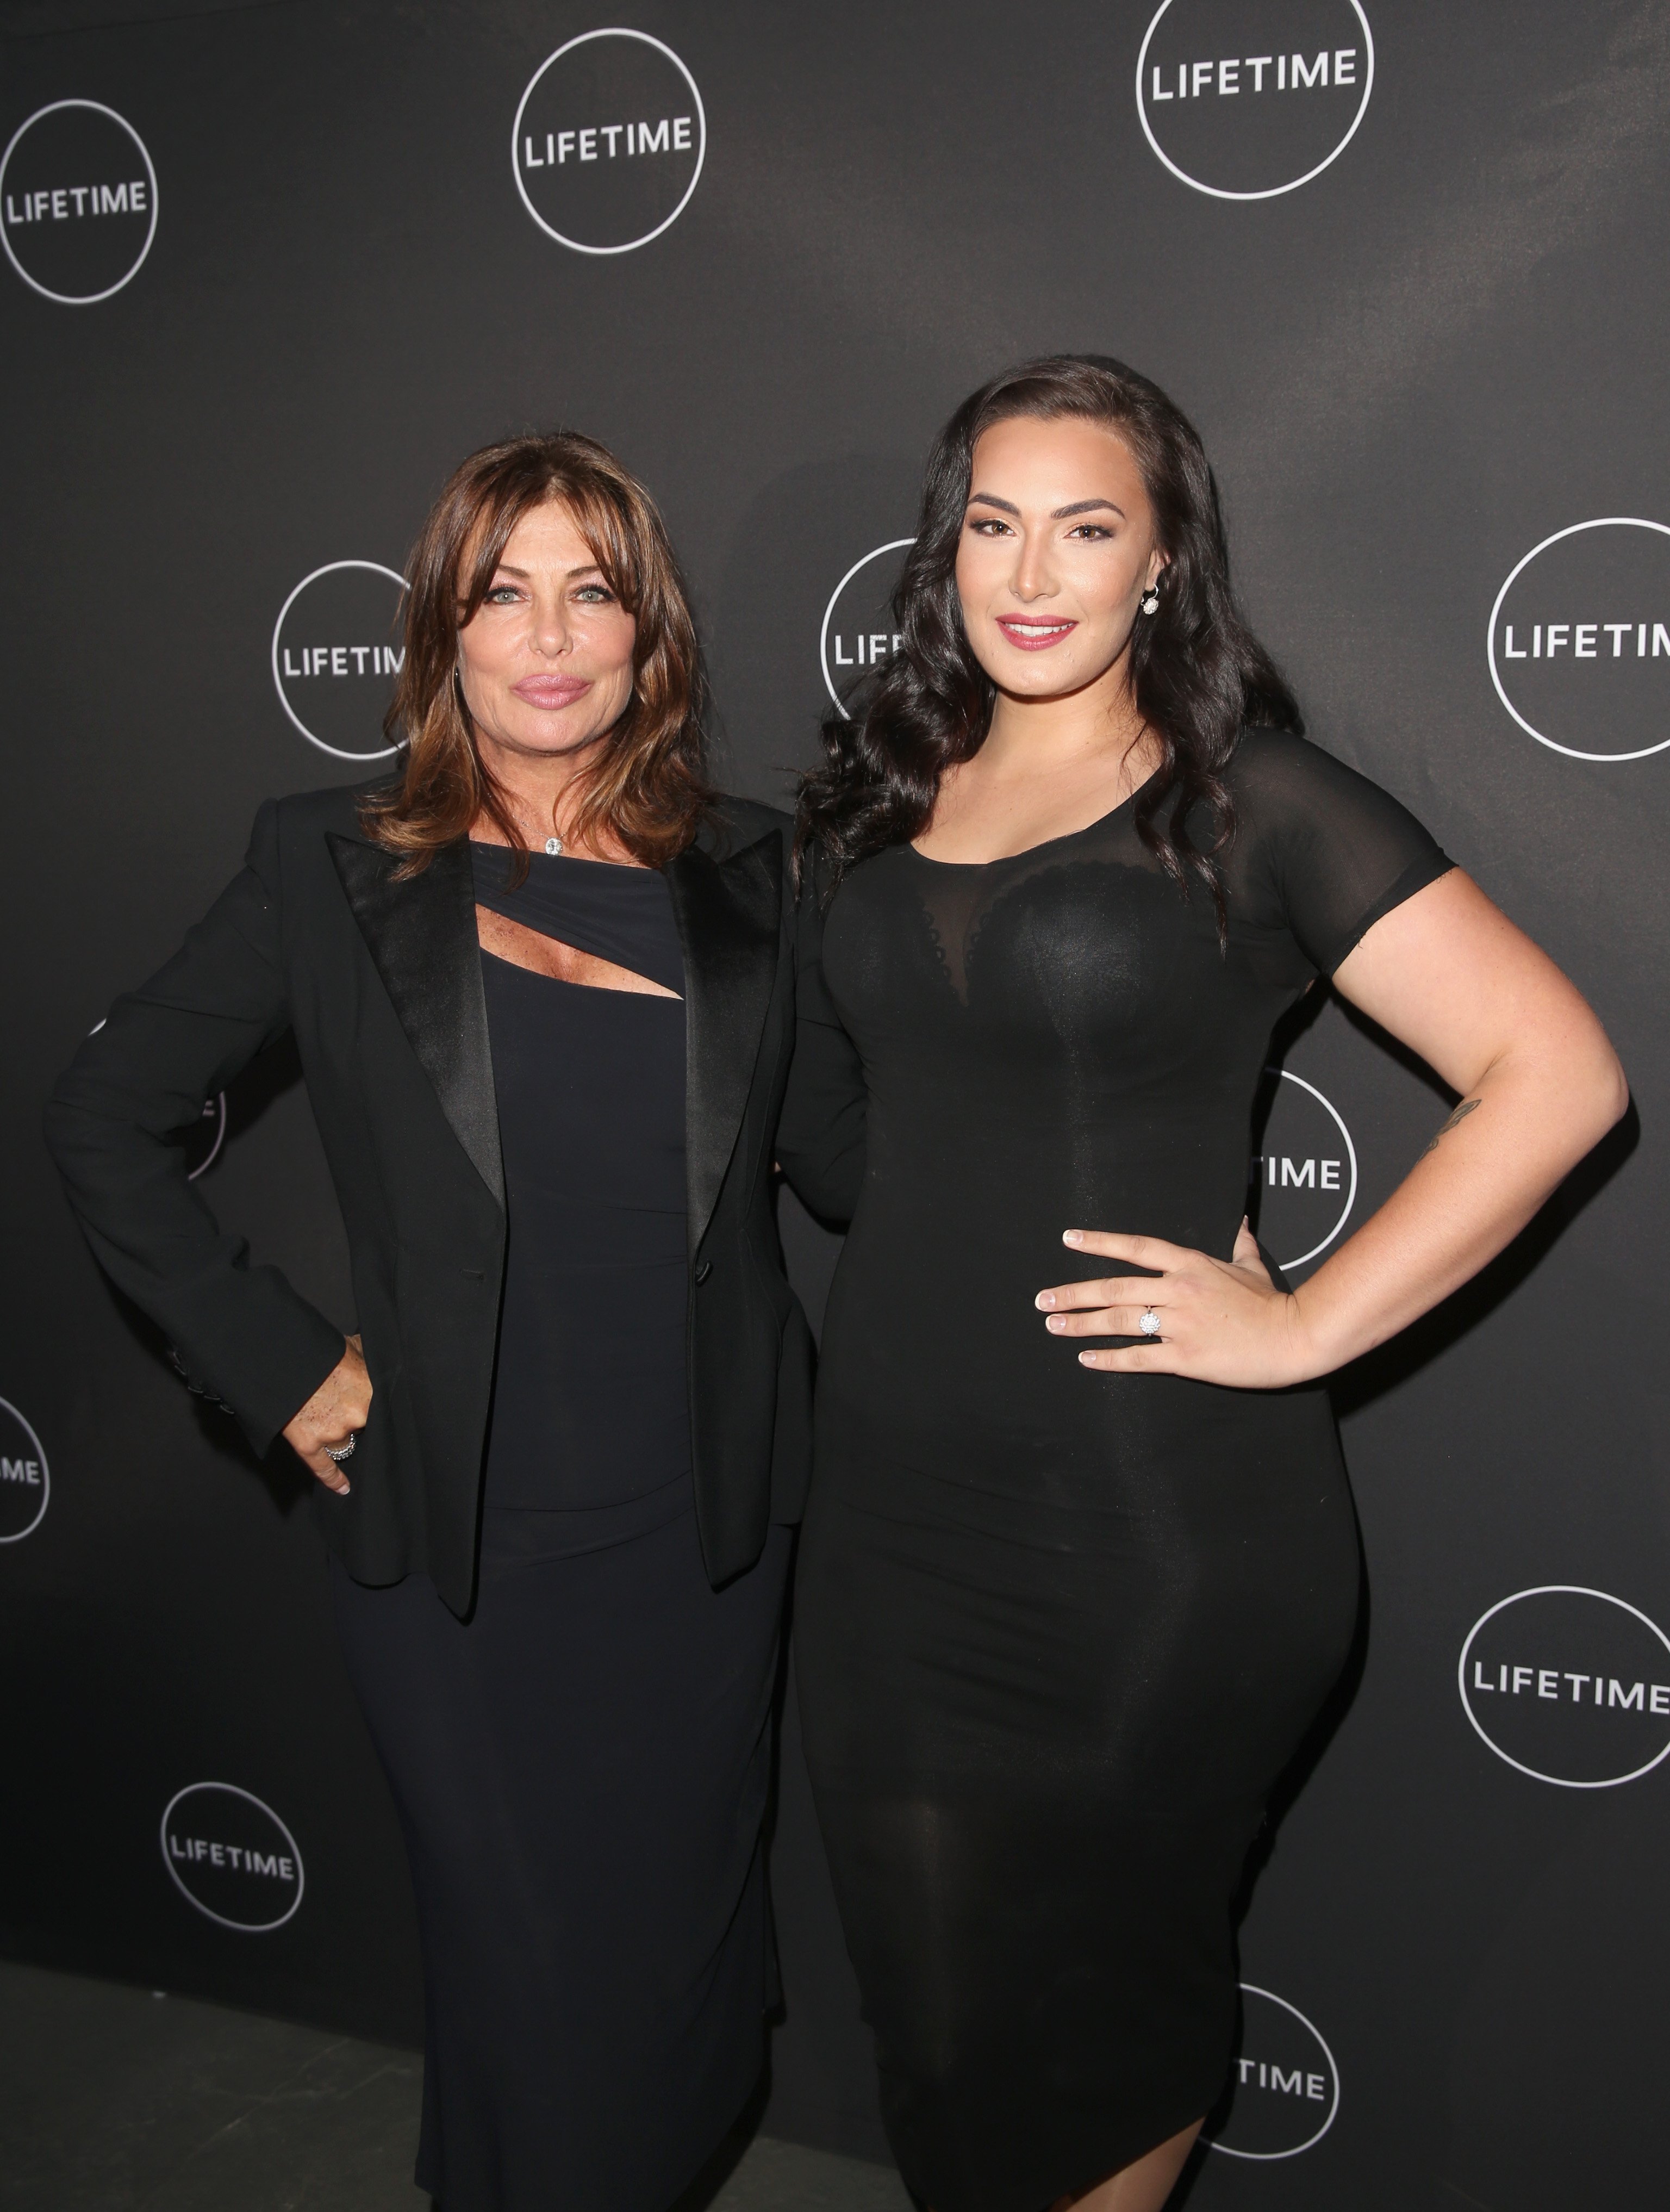 Kelly and Arissa LeBrock at Lifetime's New Docuseries "Growing Up Supermodel's" Exclusive LIVE Viewing Party on August 16, 2017, in Studio City, California | Photo: Jesse Grant/Getty Images